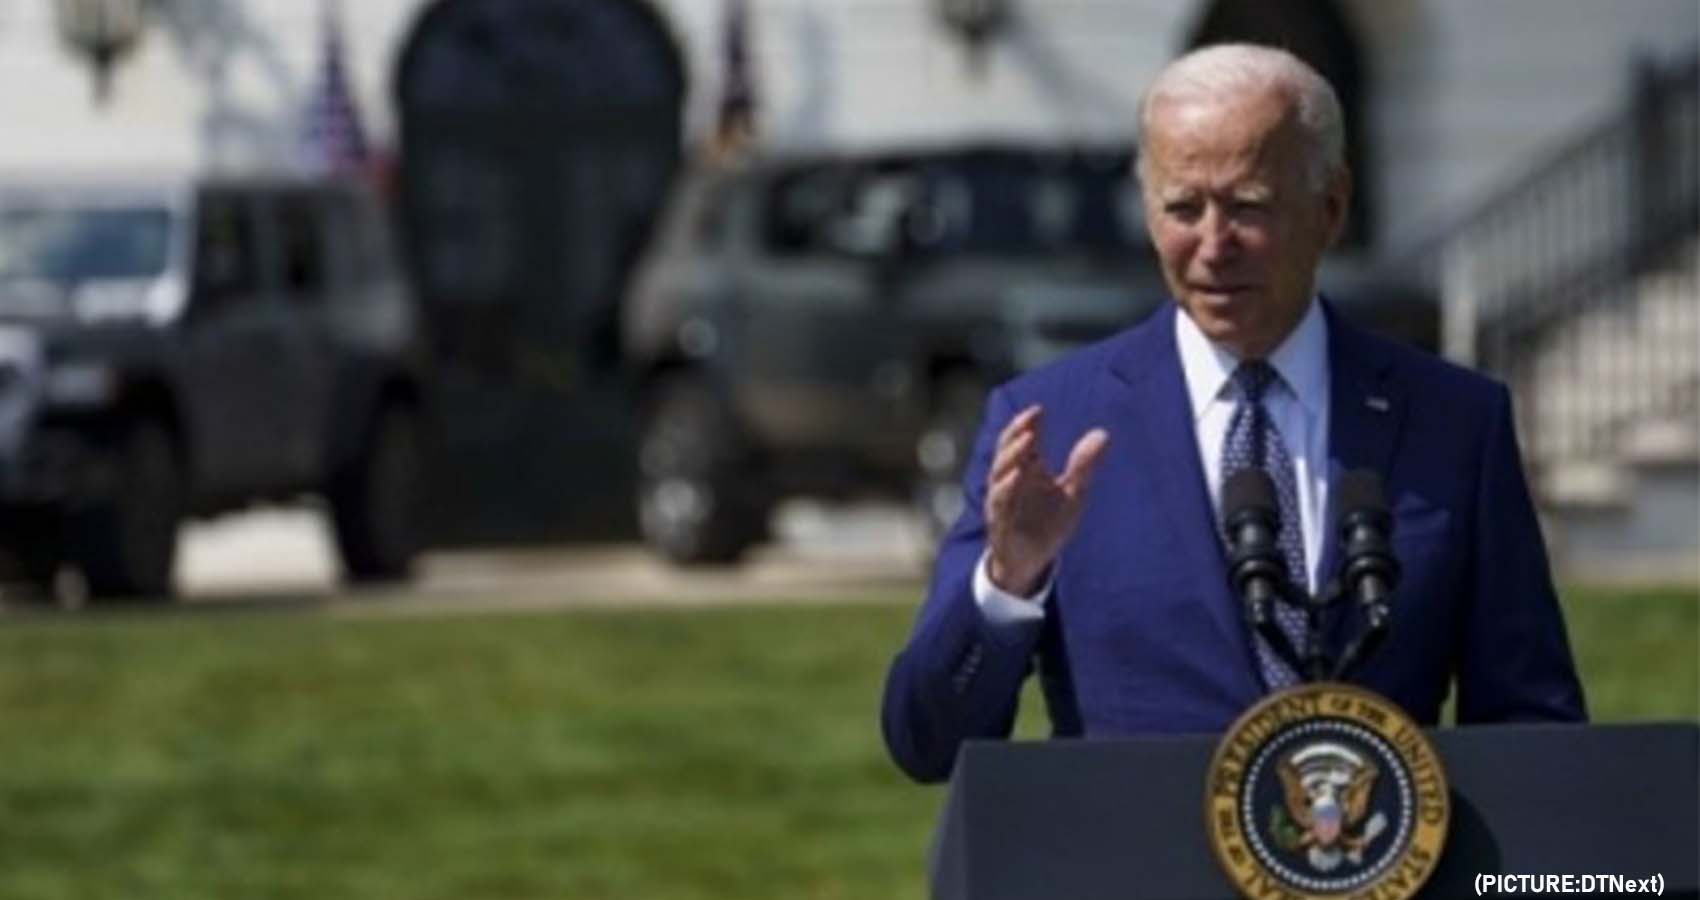 Biden Loses Ground With On Issues, Personal Traits And Job Approval